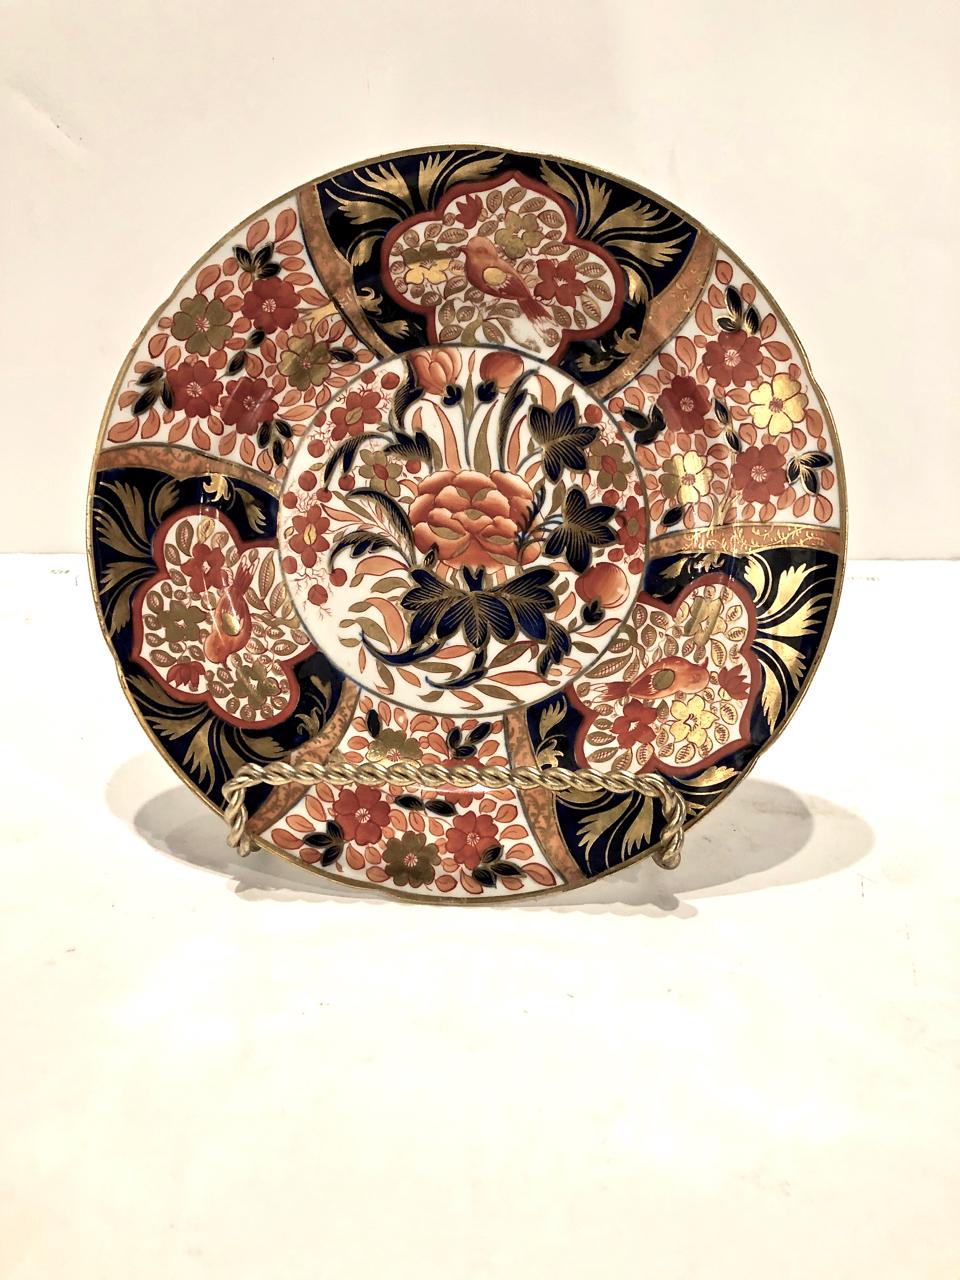 This is a pair of early 19th century Coalport dinner plates in an uncommon Imari pattern. The plates are densely decorated with a center reserve of an abstract peony surrounded by large reserves of birds and florals. The deep cobalt and iron red is